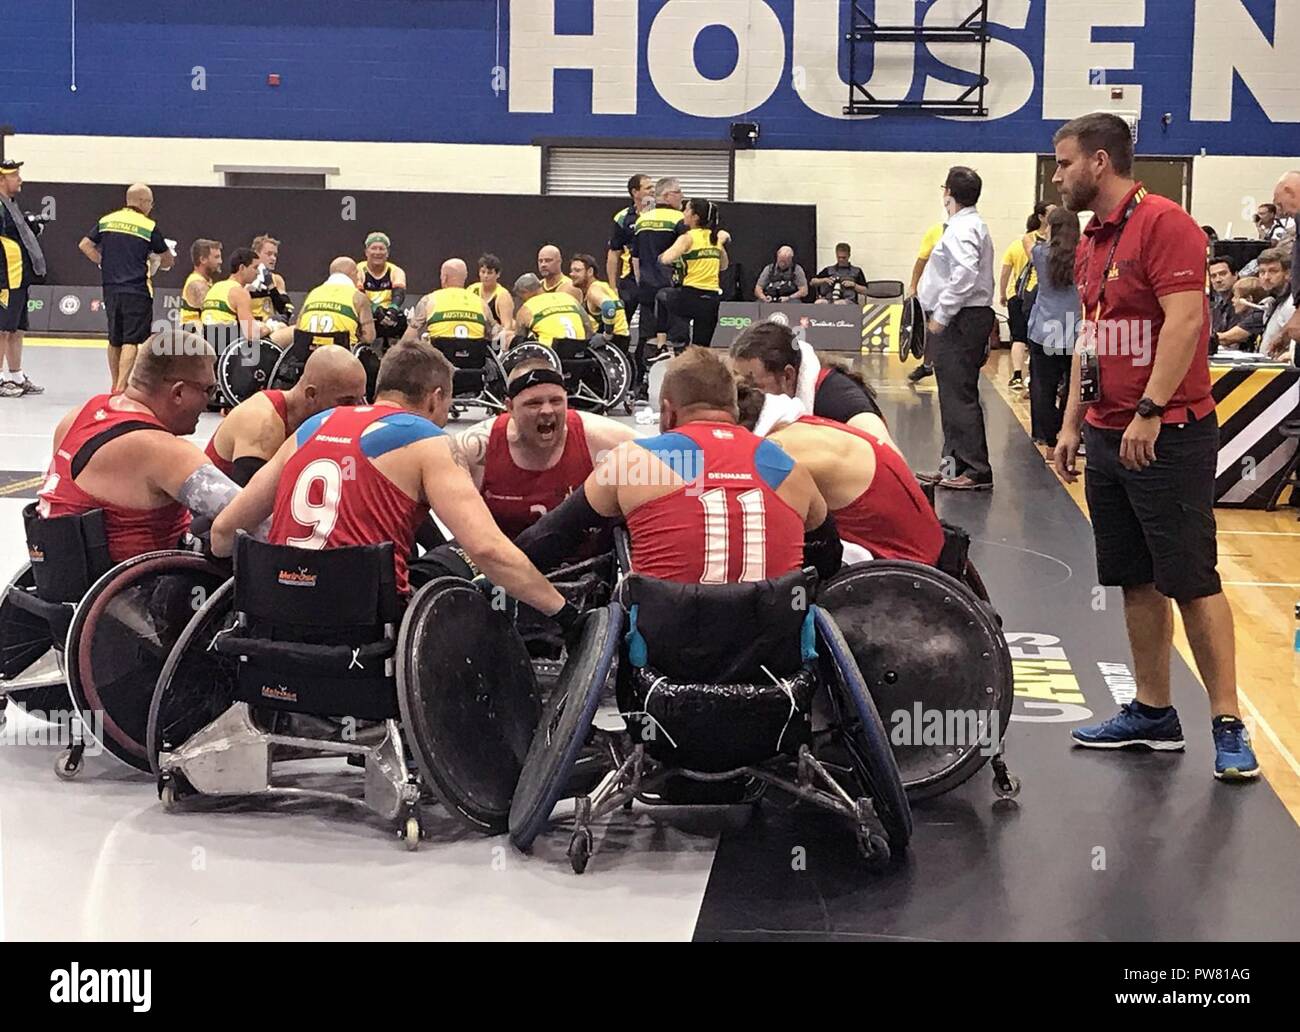 Danish Army Cpl. Mark Peters leads the Denmark rugby team in a victory  cheer after defeating Australia in a wheelchair rugby matchup in pool play  at the Mattamy Athletics Center during the